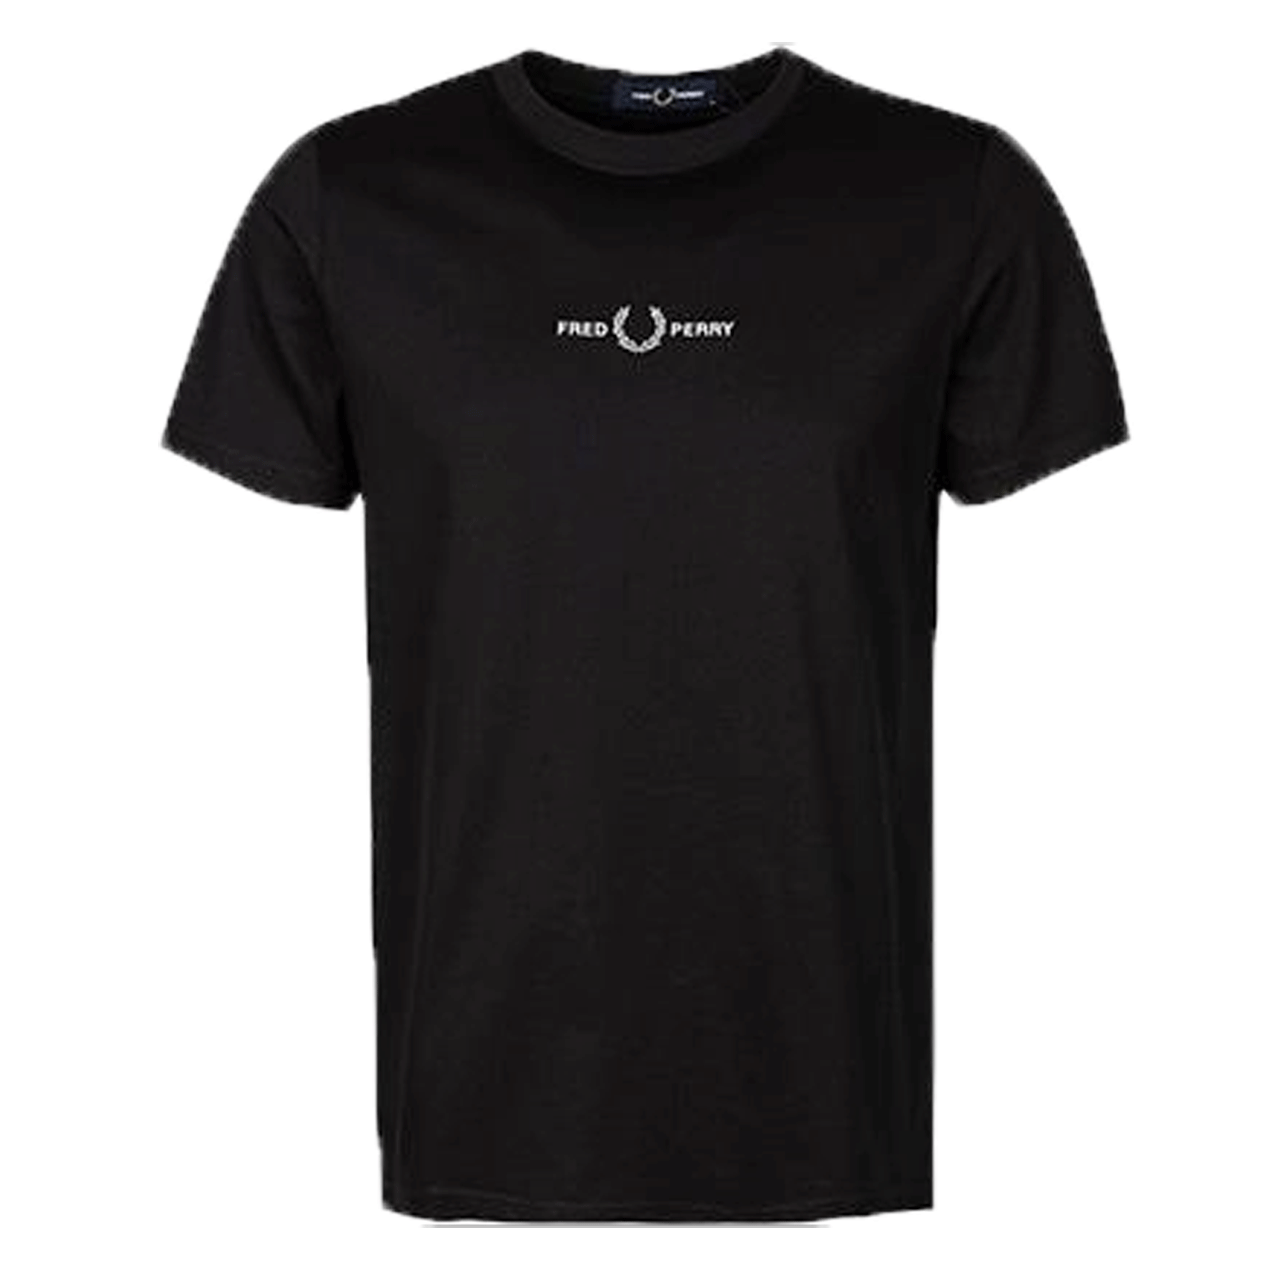 FRED PERRY EMBROIDERED TEE BLACK M4580-102